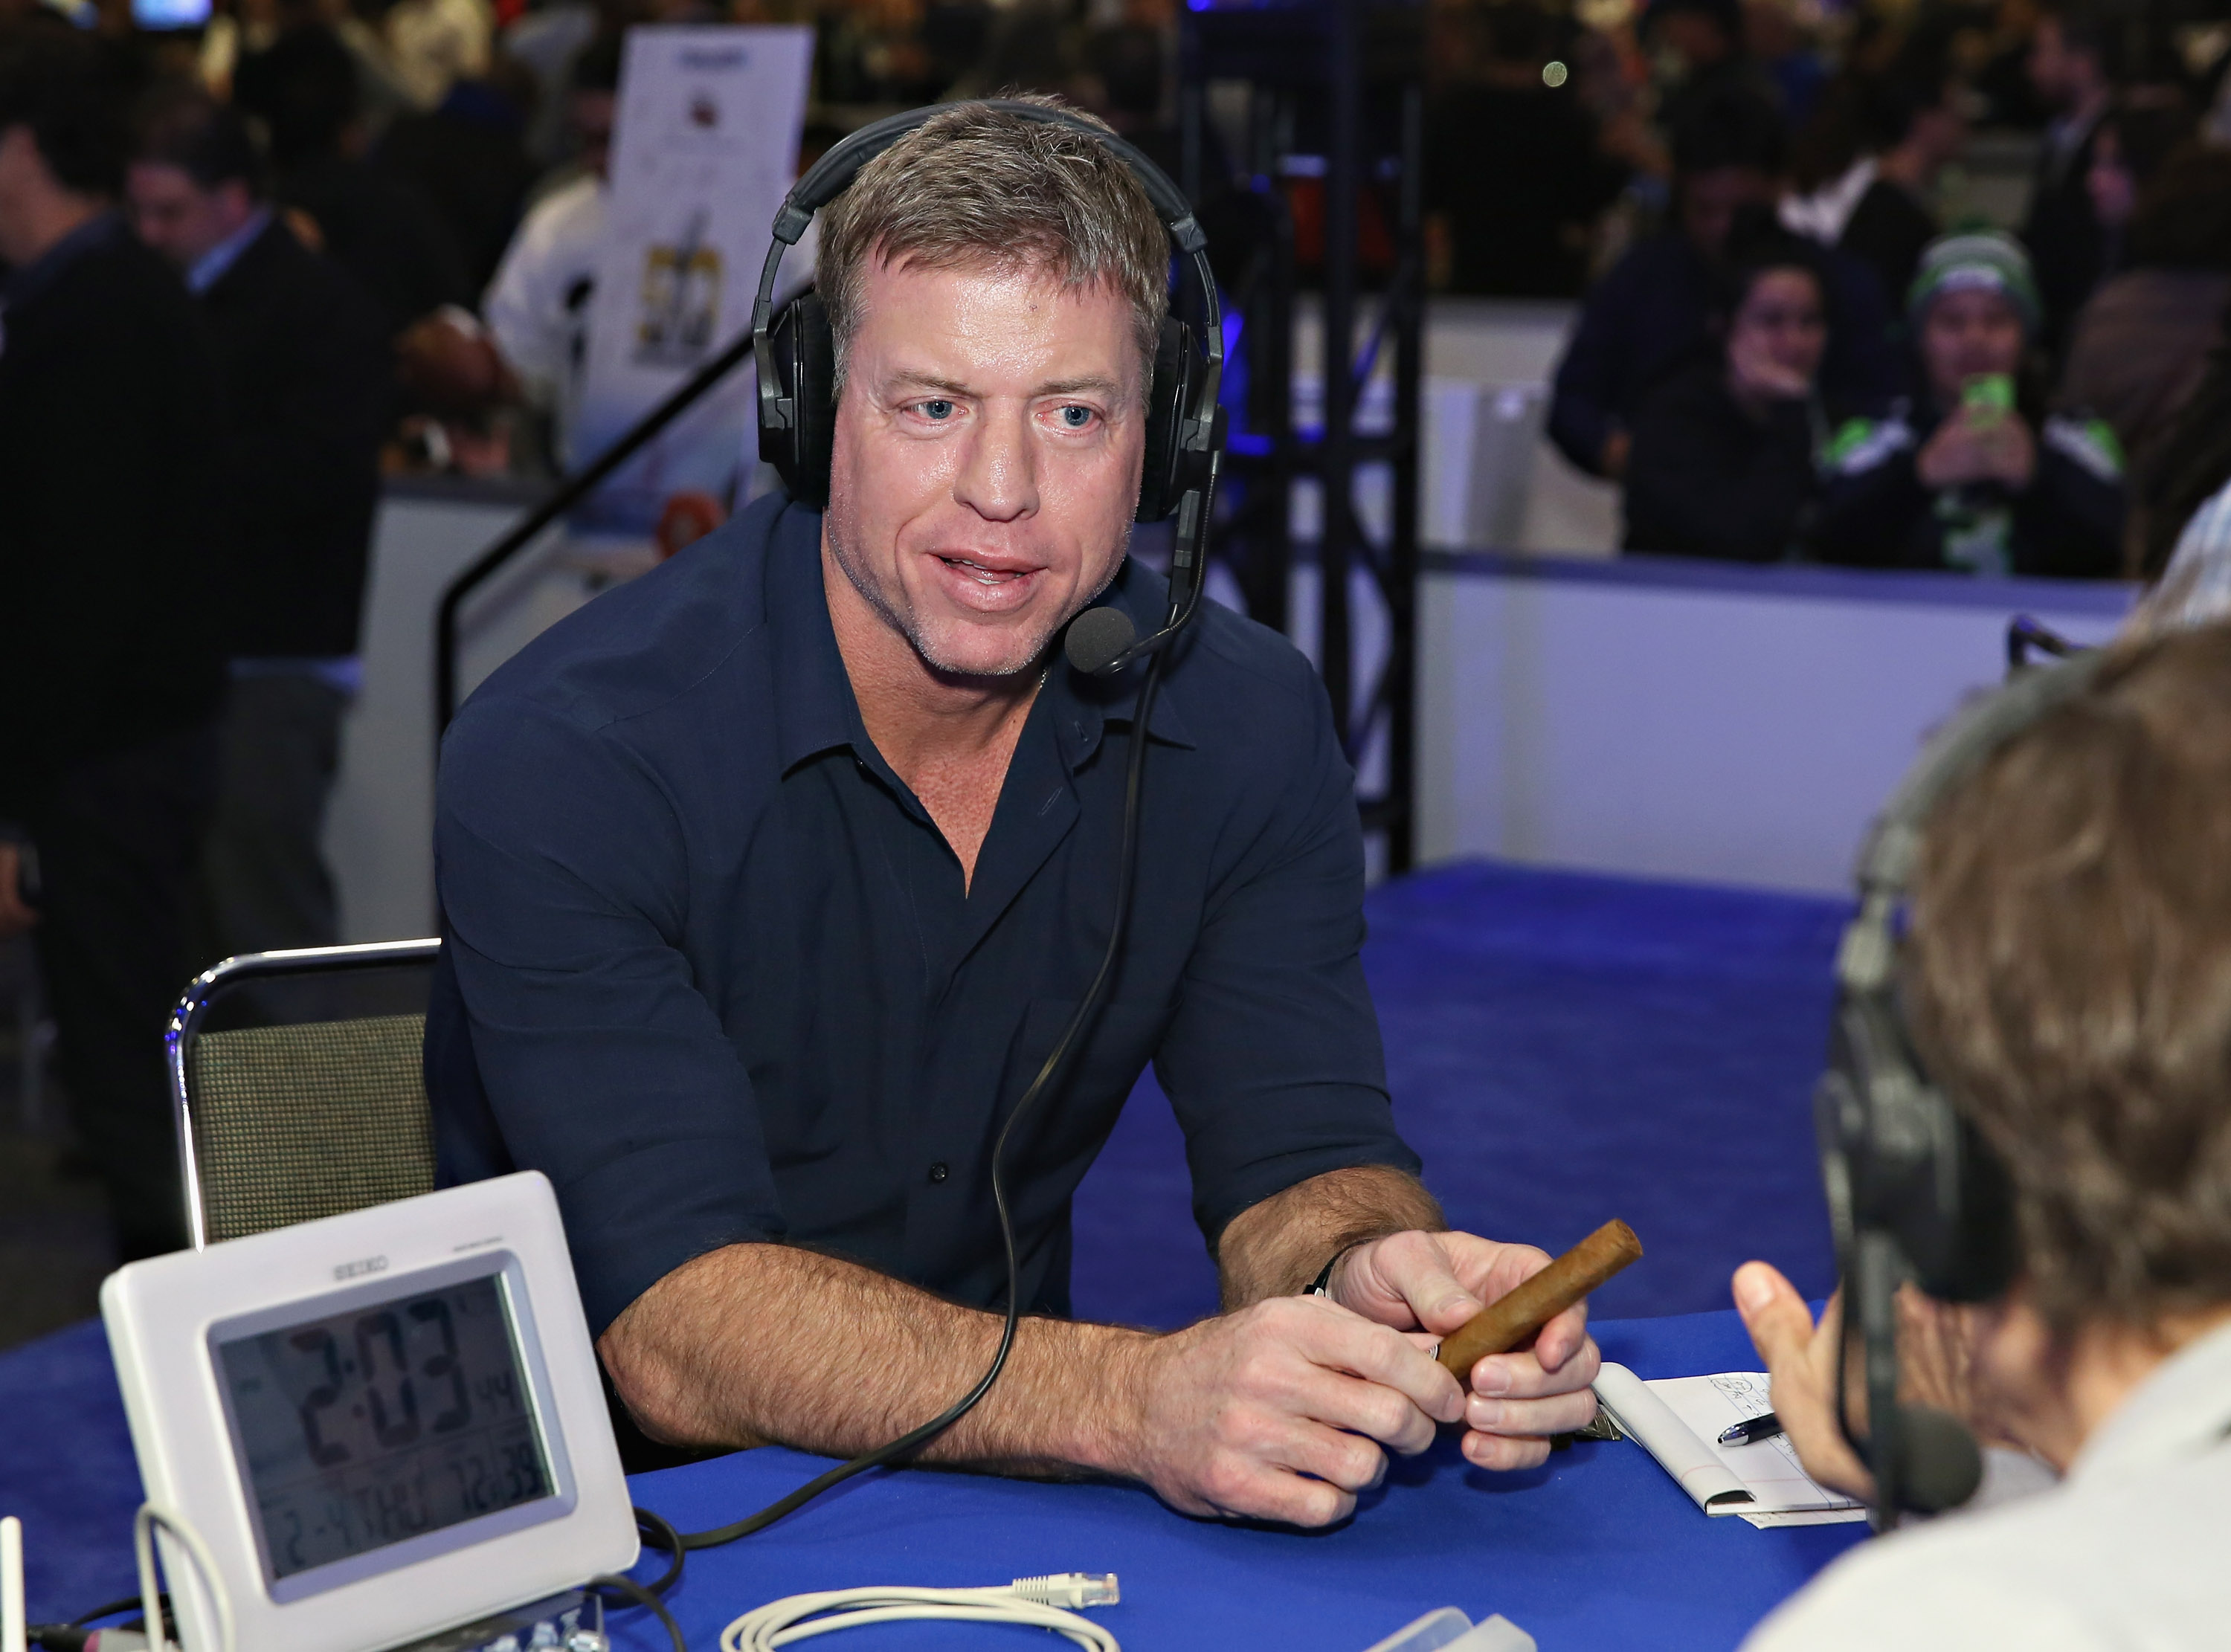 Former NFL player and sportscaster Troy Aikman visits the SiriusXM set at Super Bowl 50 Radio Row at the Moscone Center on February 4, 2016 in San Francisco, California.  (Photo by Cindy Ord/Getty Images for SiriusXM)